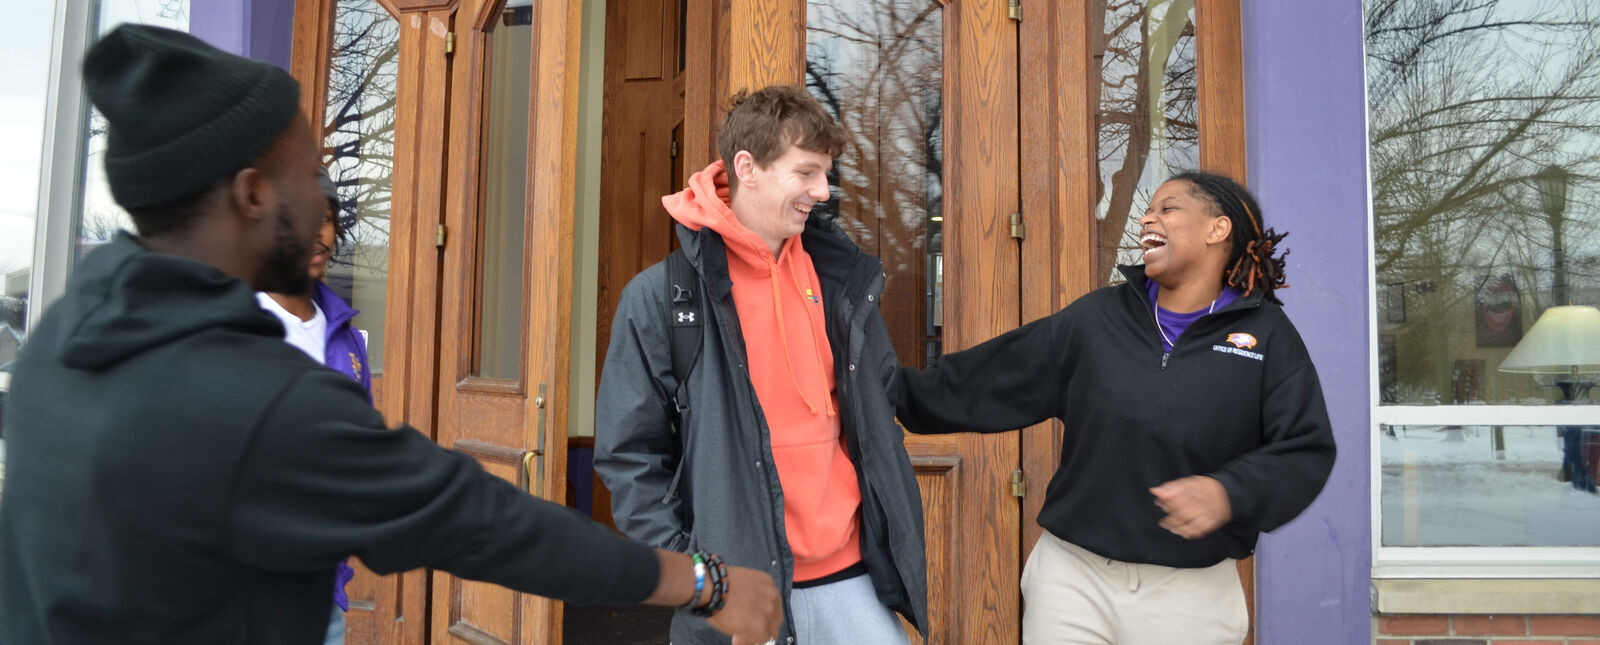 Students share smiles and laughs at the entrance to a residence hall